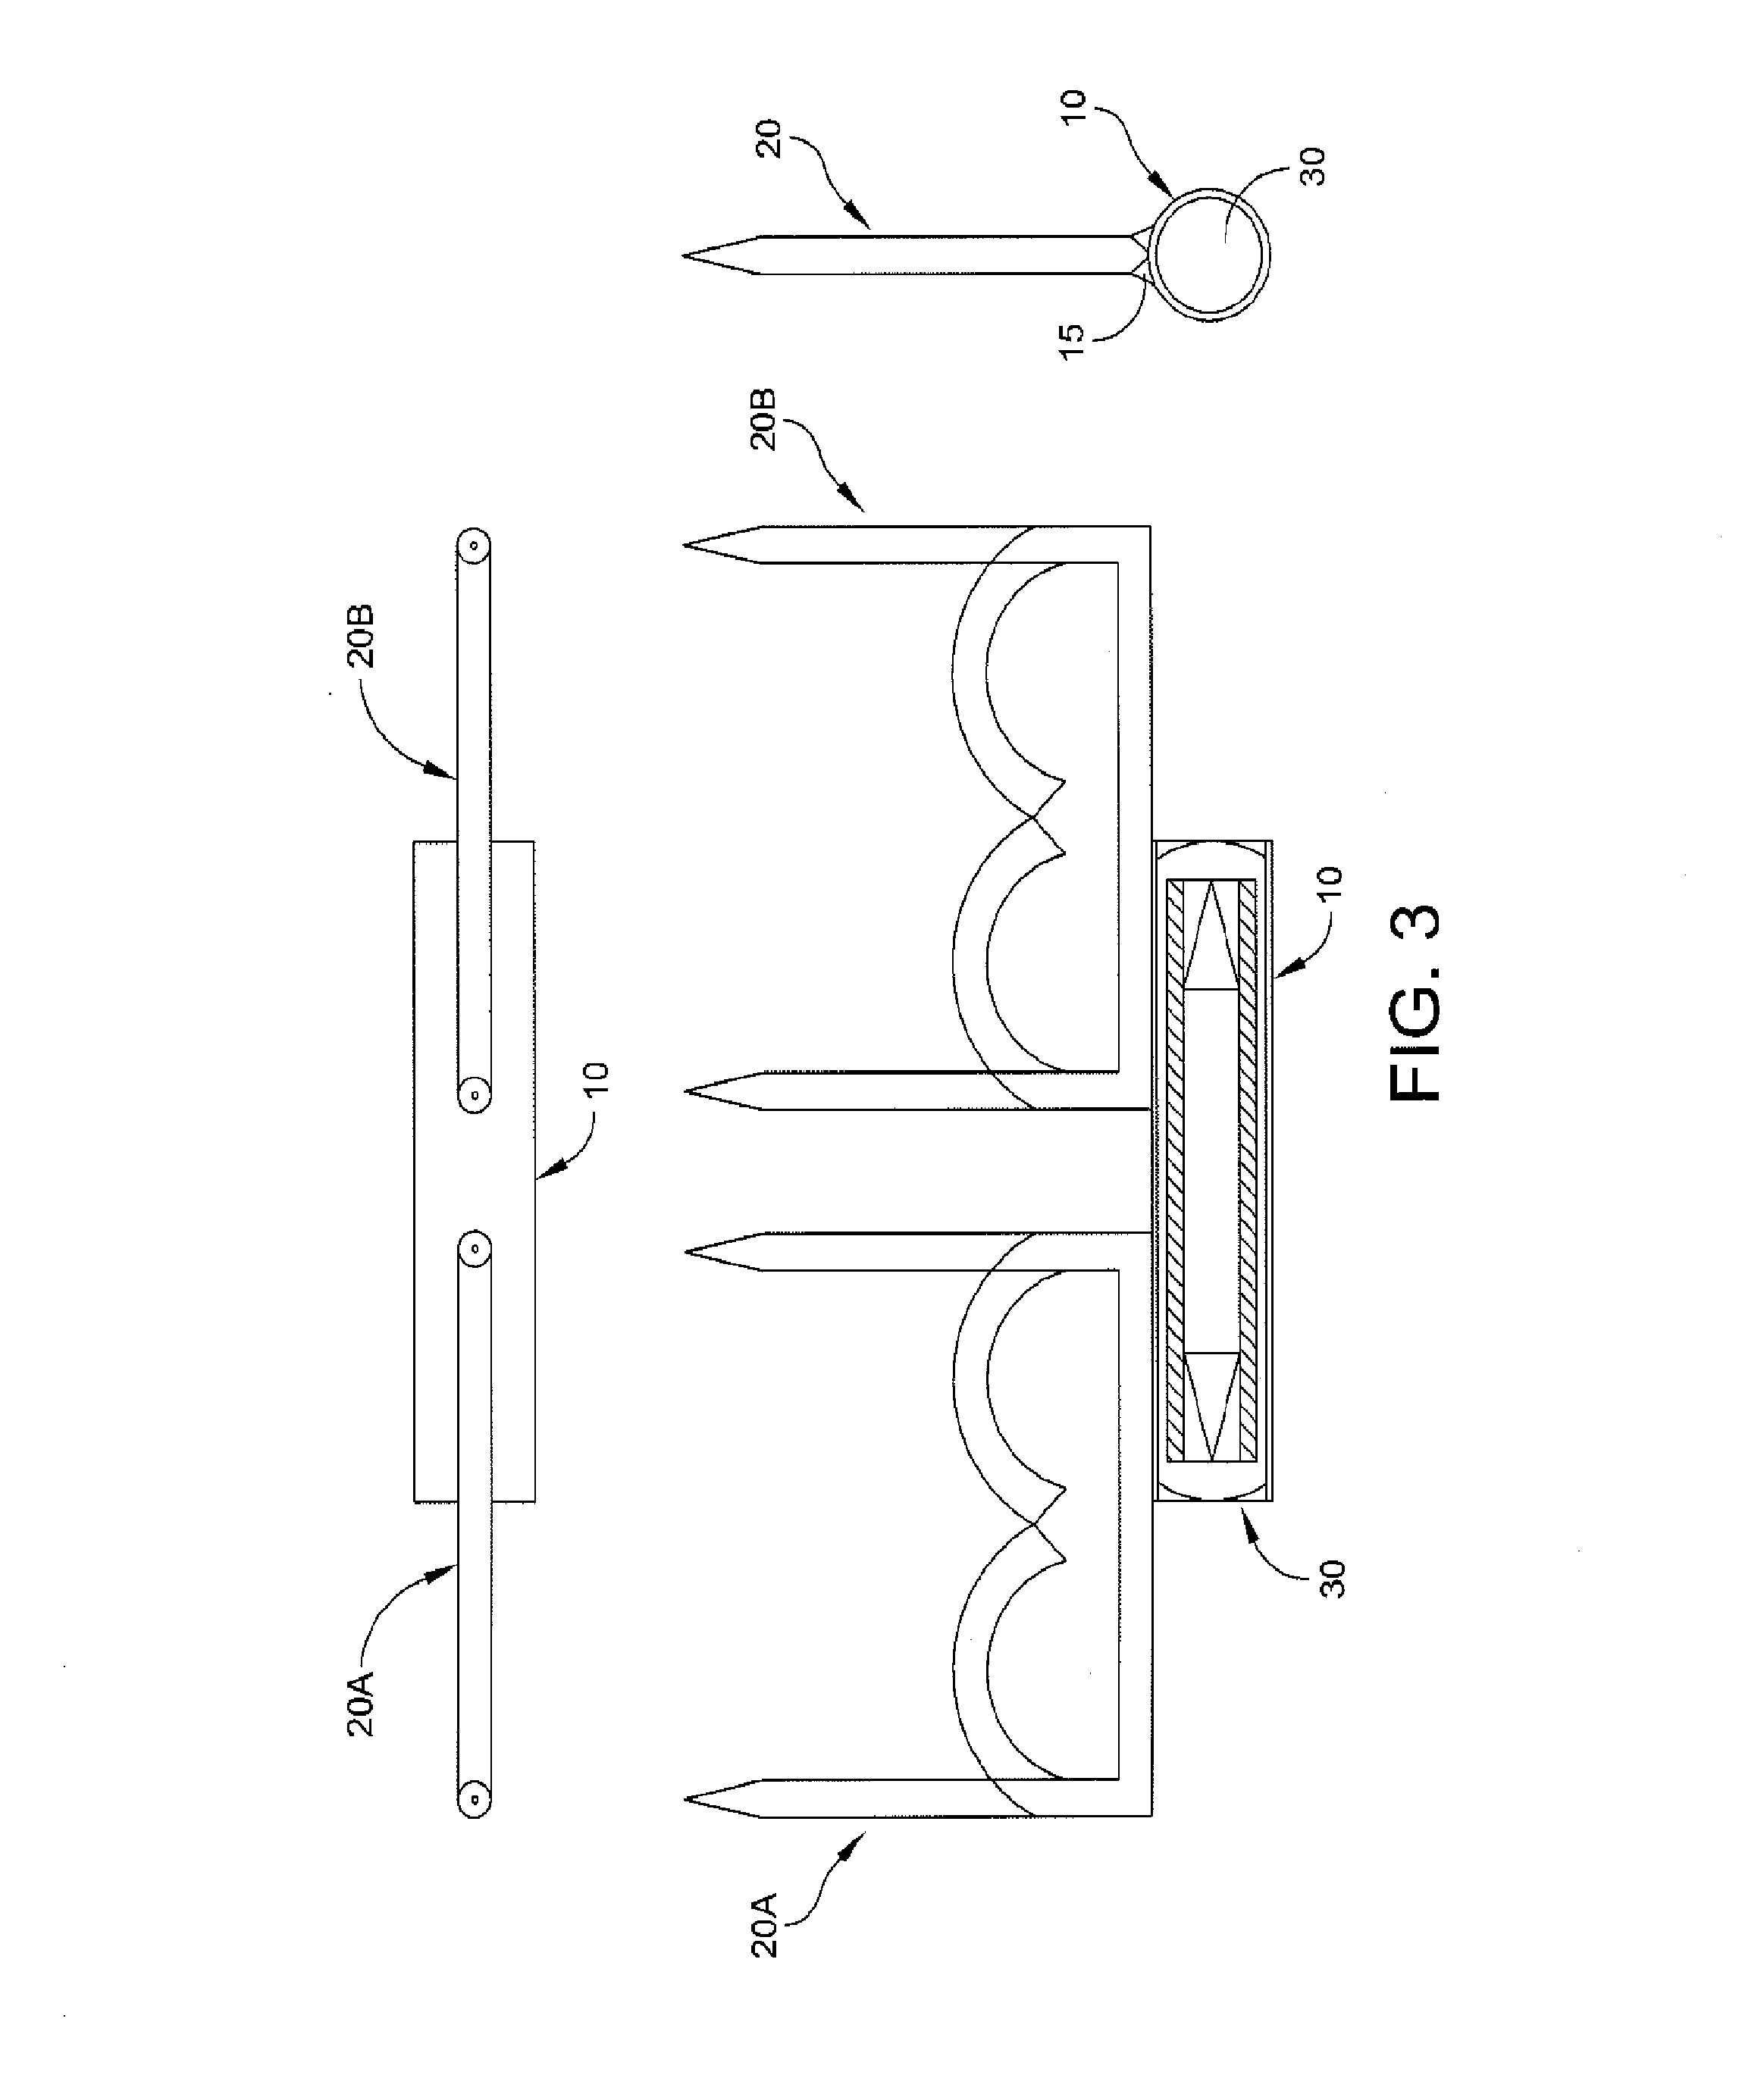 Delivery applicator for radioactive staples for brachytherapy medical treatment